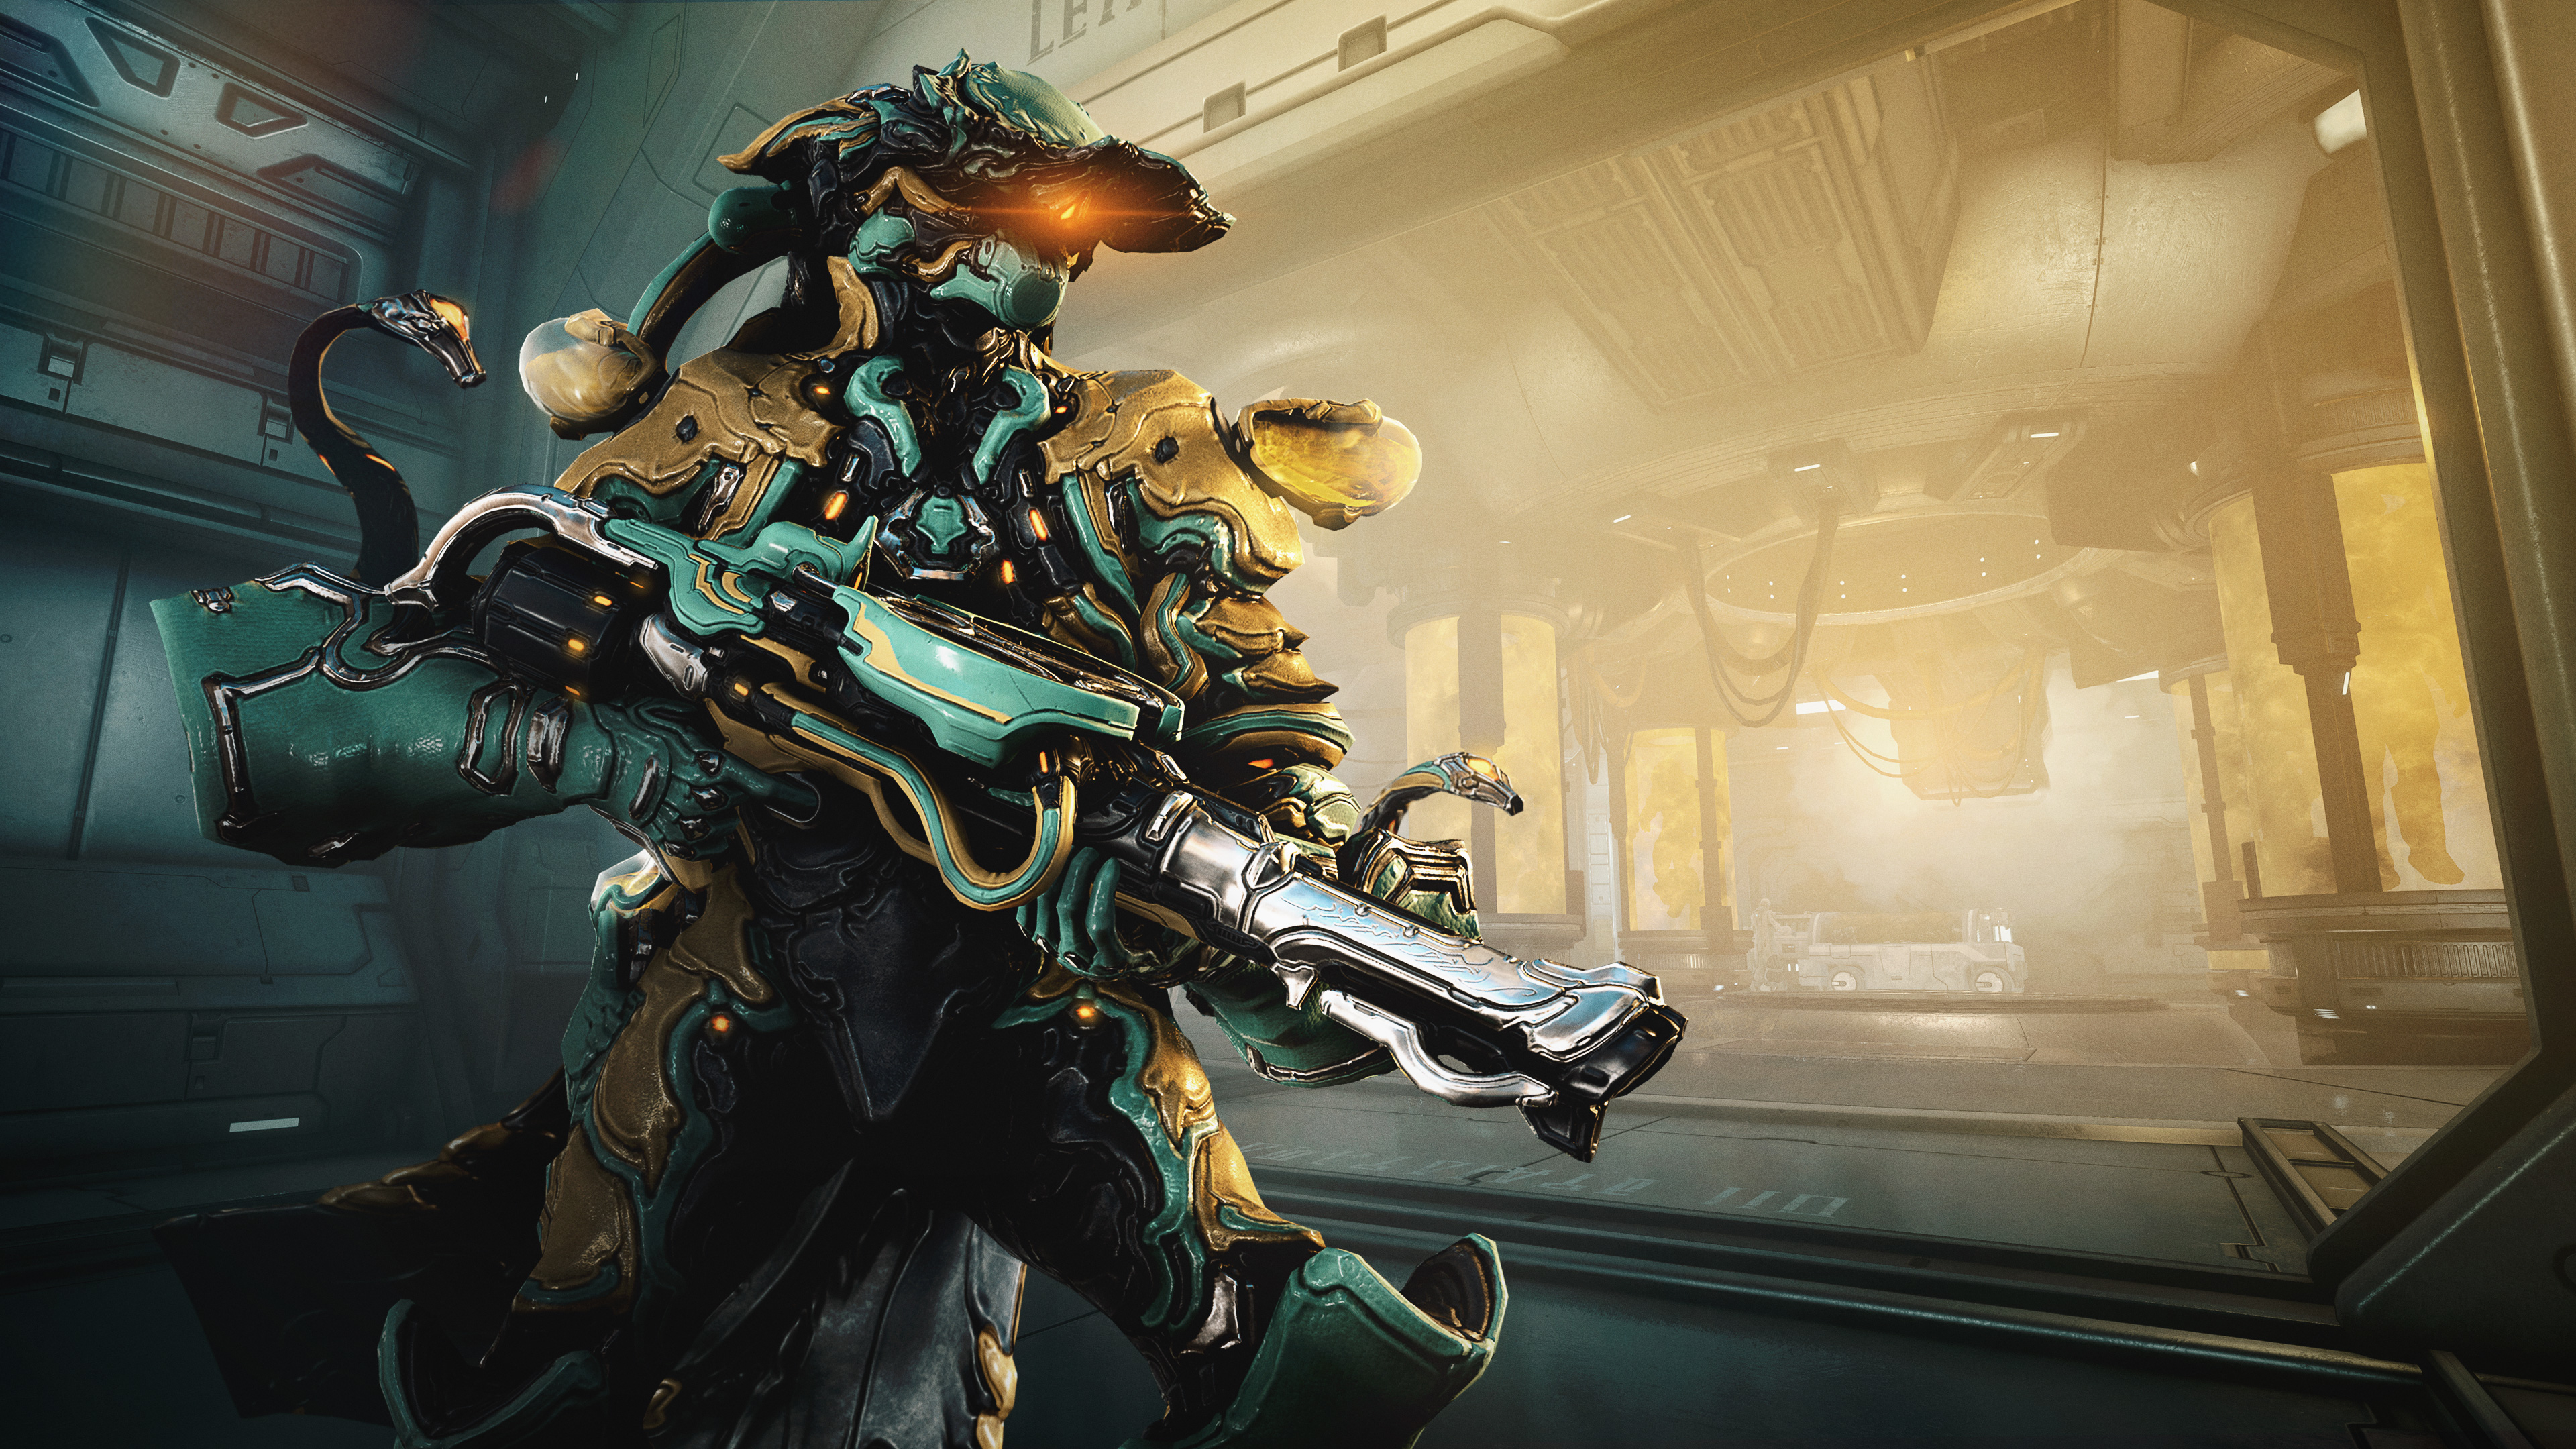 Lavos Warframe Wallpaper Hd Games 4k Wallpapers Images Photos And Background Wallpapers Den